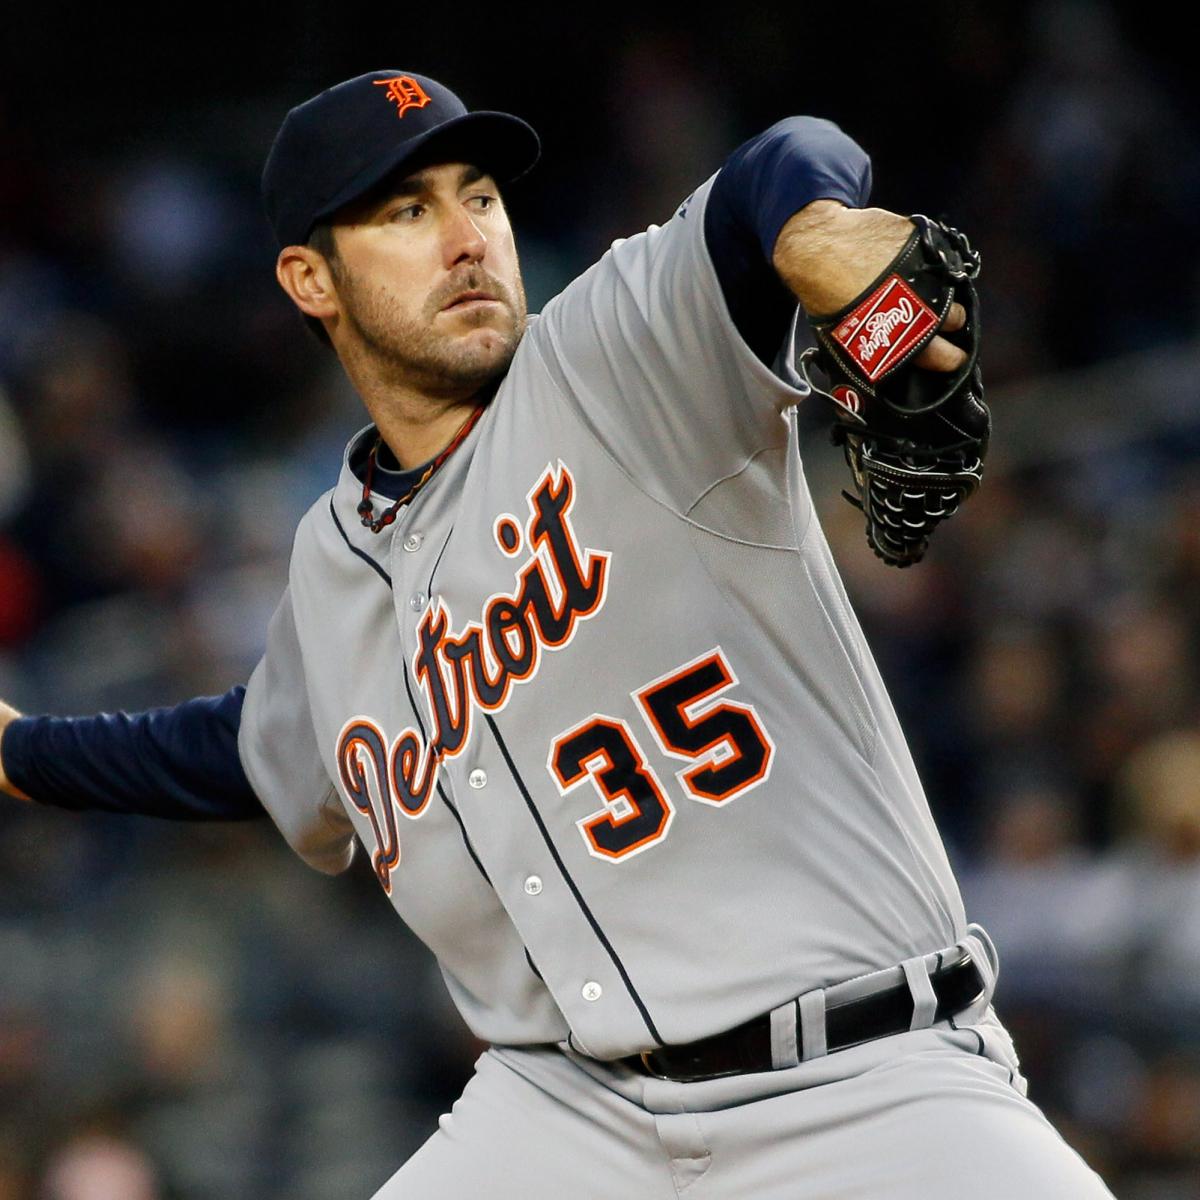 MLB Rumors Detroit Tigers Must Add TopEnd Pitcher to Bolster Rotation